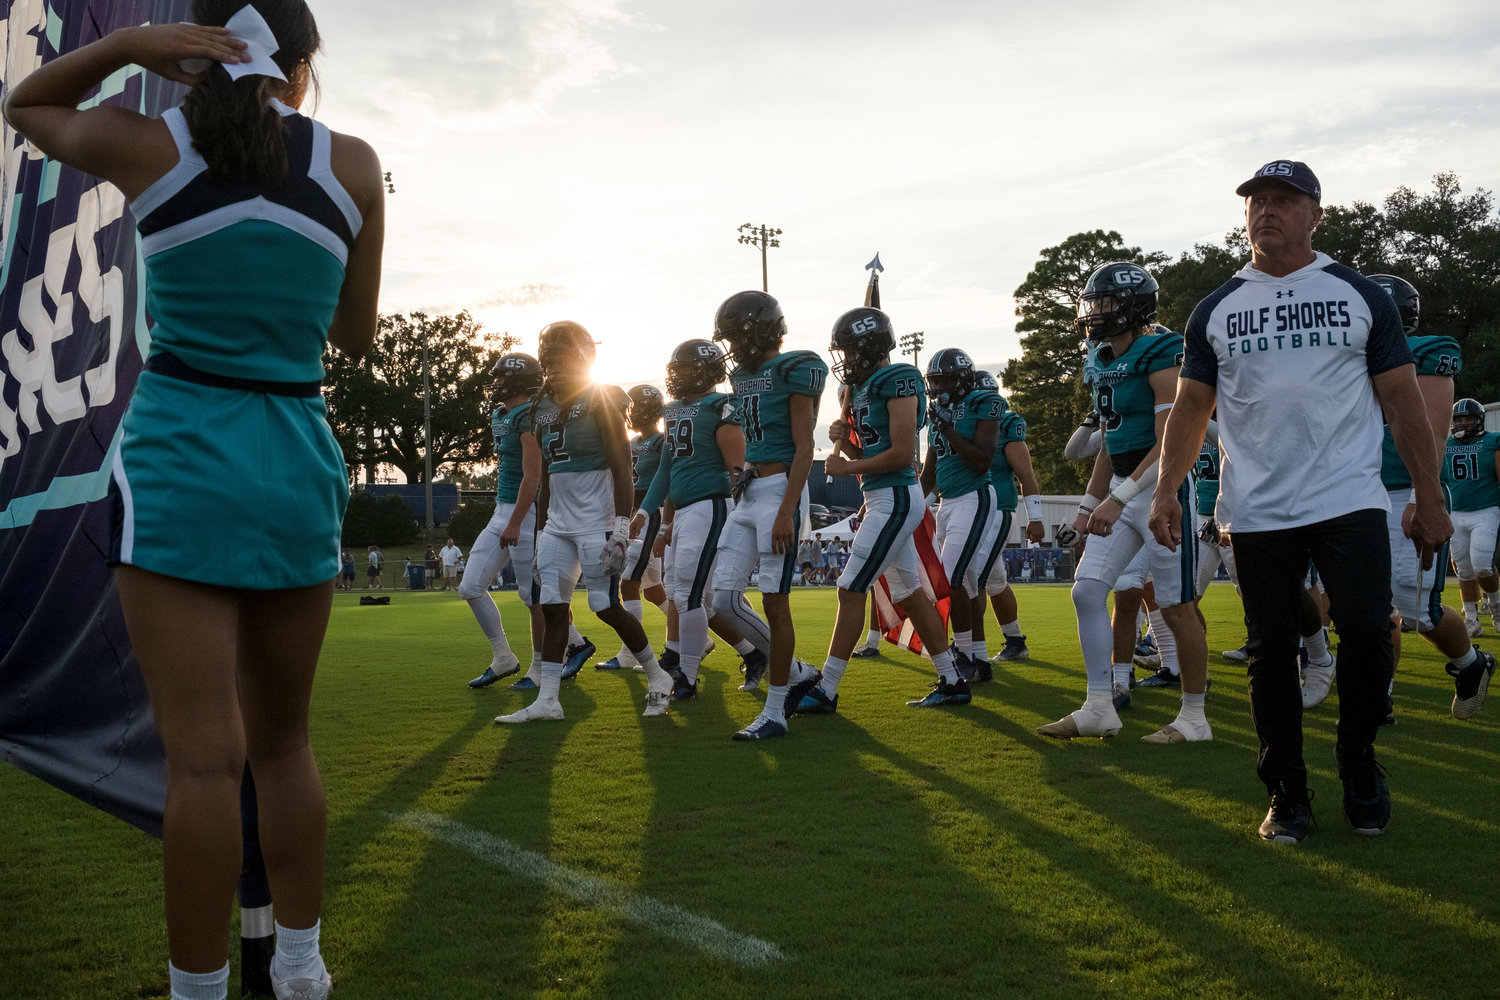 The Gulf Shores Dolphins prepare to take the field ahead of their season-opening game against the St. Michael Catholic Cardinals Aug. 18 in Fairhope. After a 22-12 win over Faith Academy to open region play last Friday night, head coach Mark Hudsepth has Gulf Shores out to the school's first 3-0 start to a regular season.